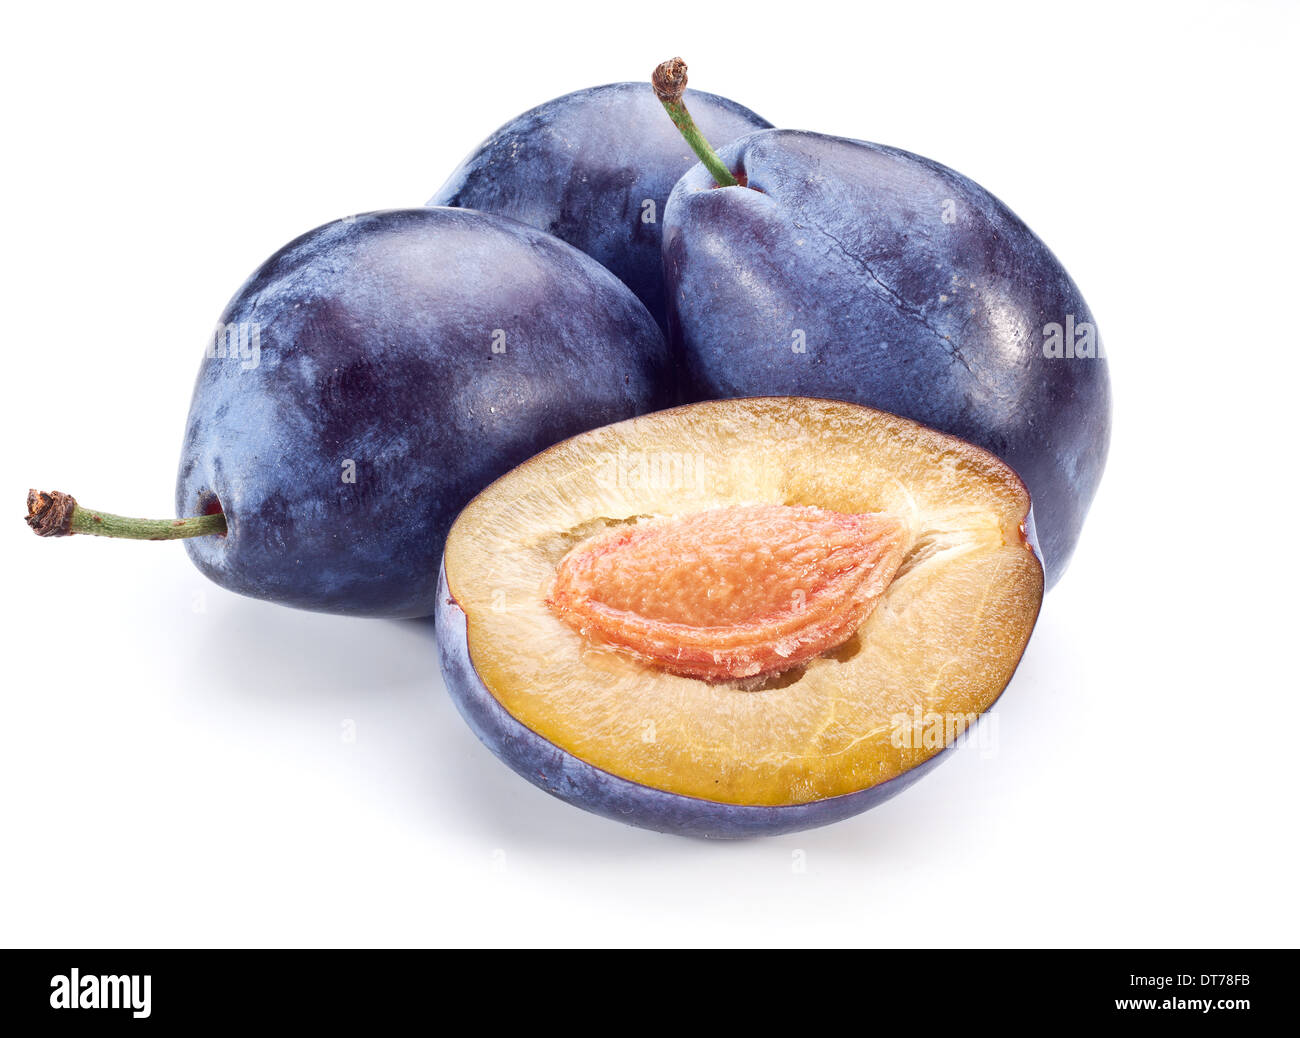 Plums with a half of one isolated on a white background. Stock Photo